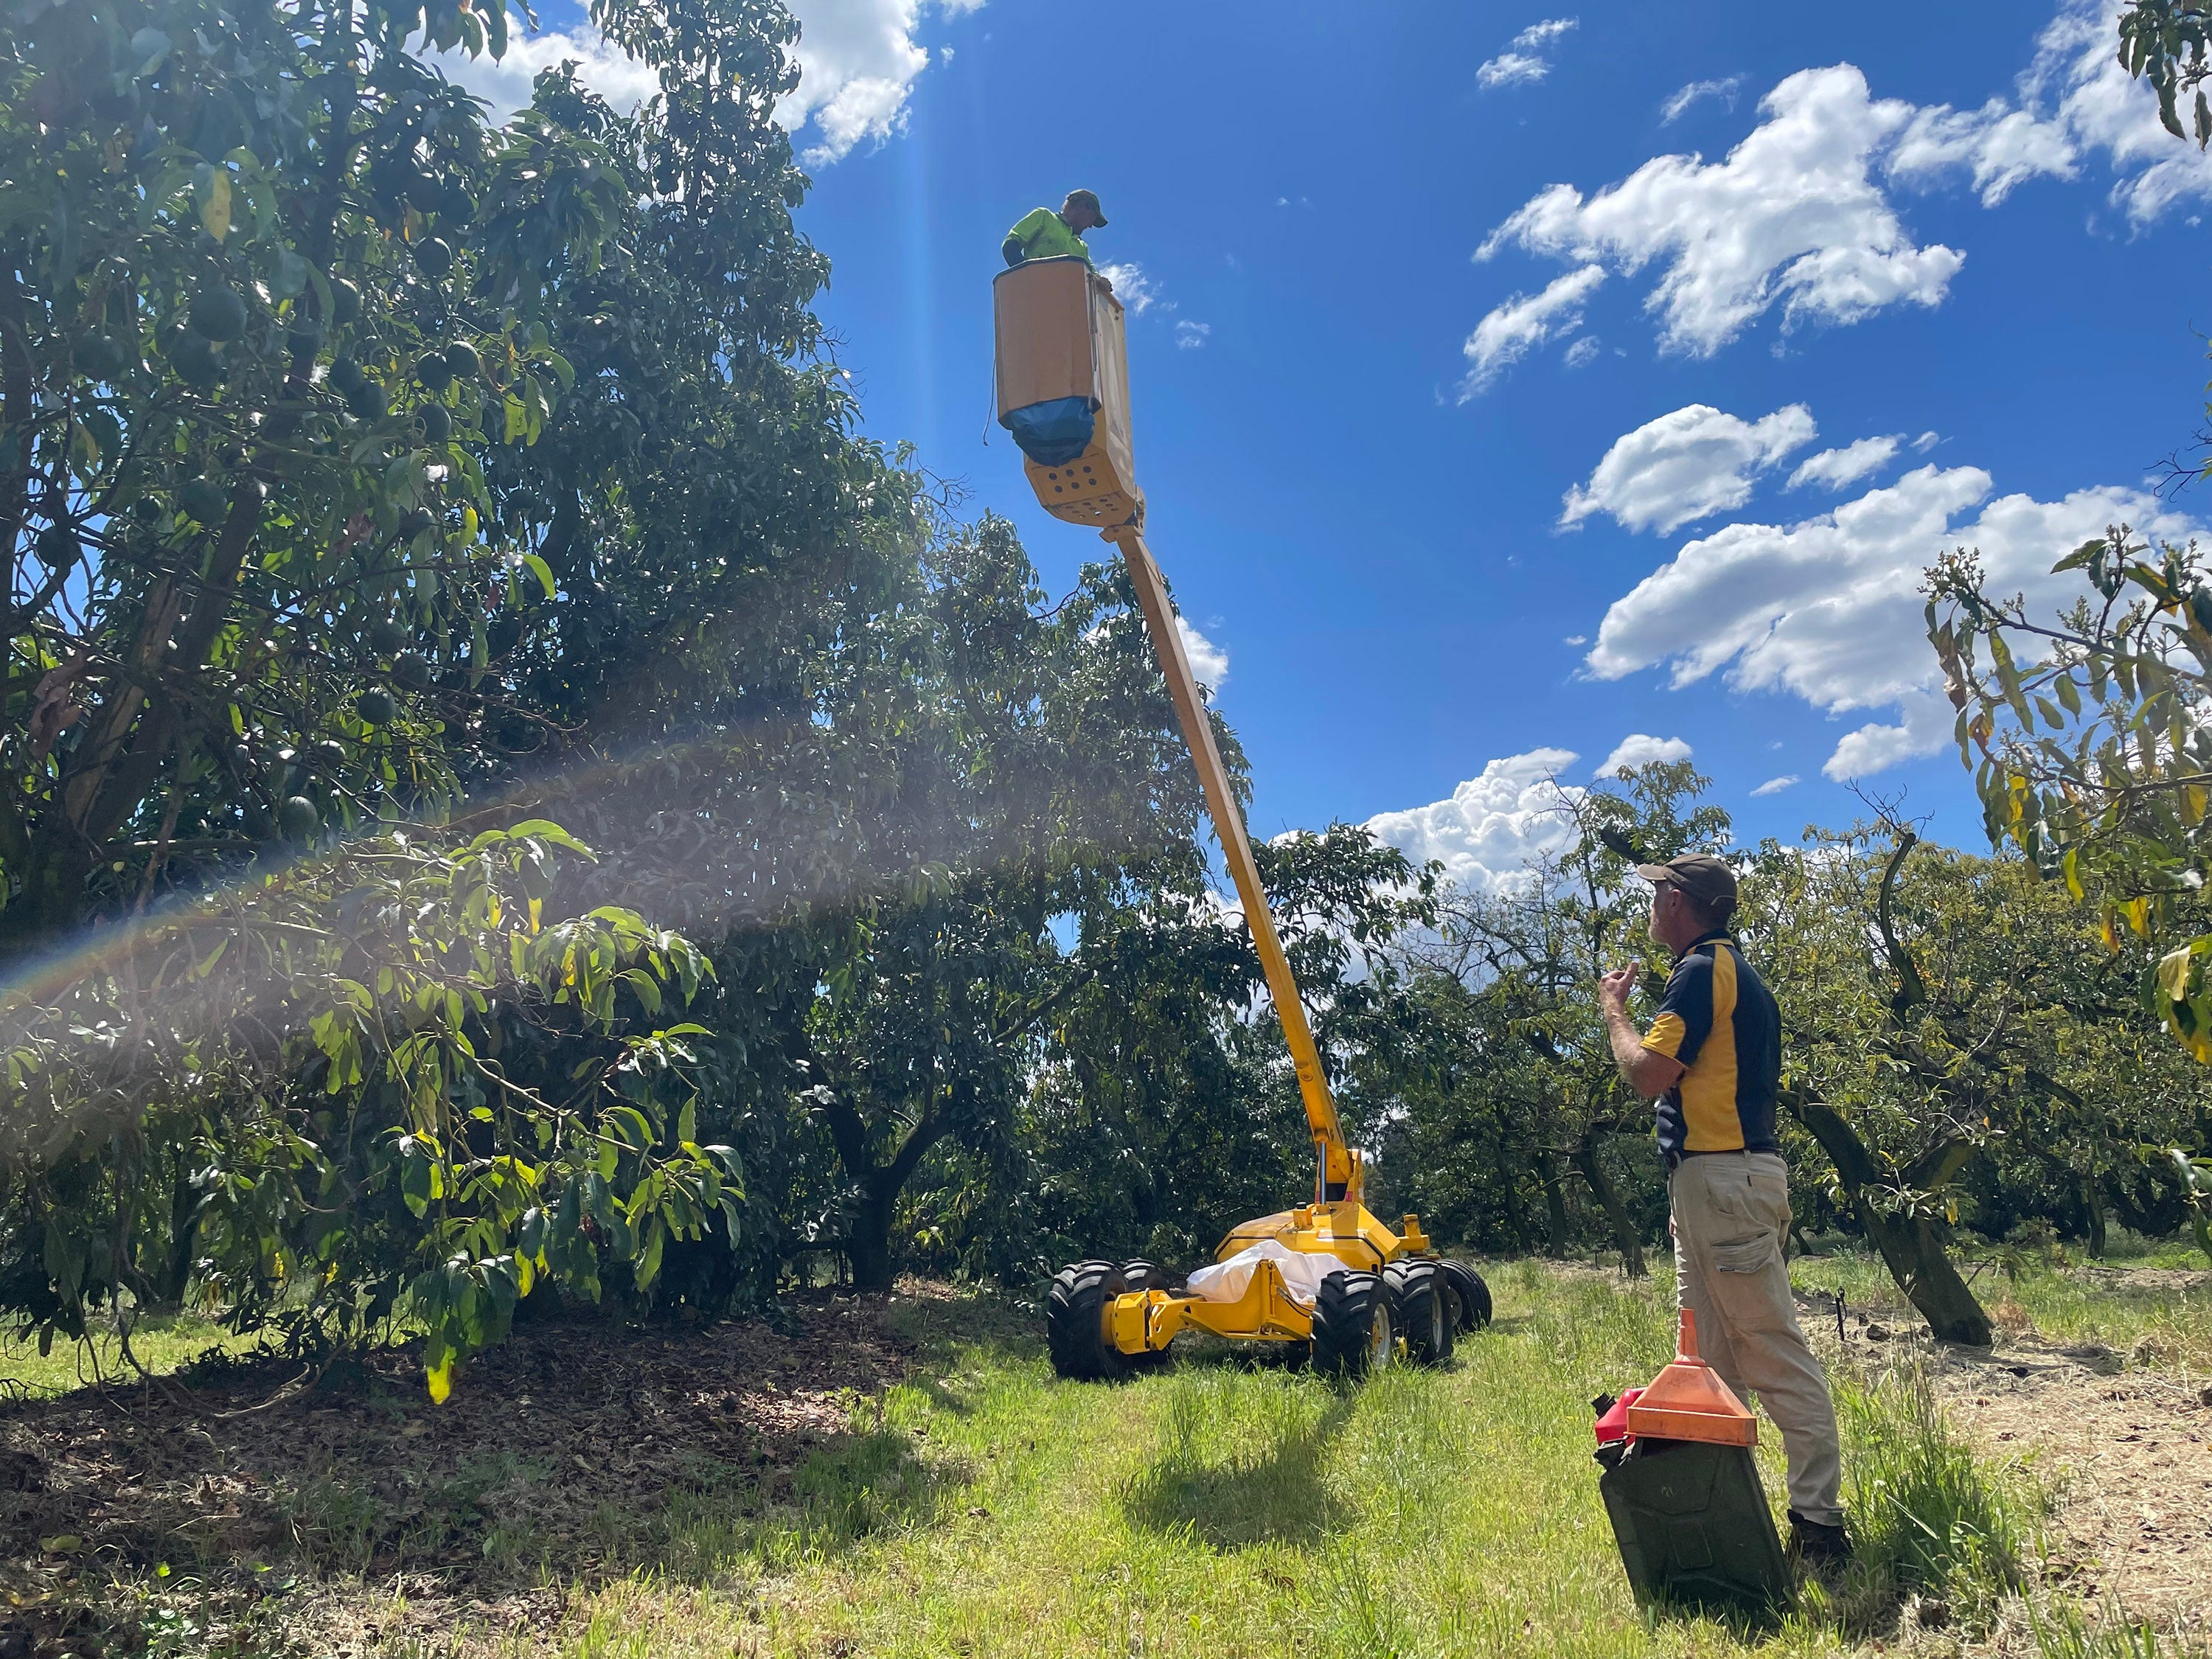 Tim Kemp gets ready to refuel a cherry picker used to pick avocados. Coronavirus shutdowns hit demand for the fruit, while supply increased